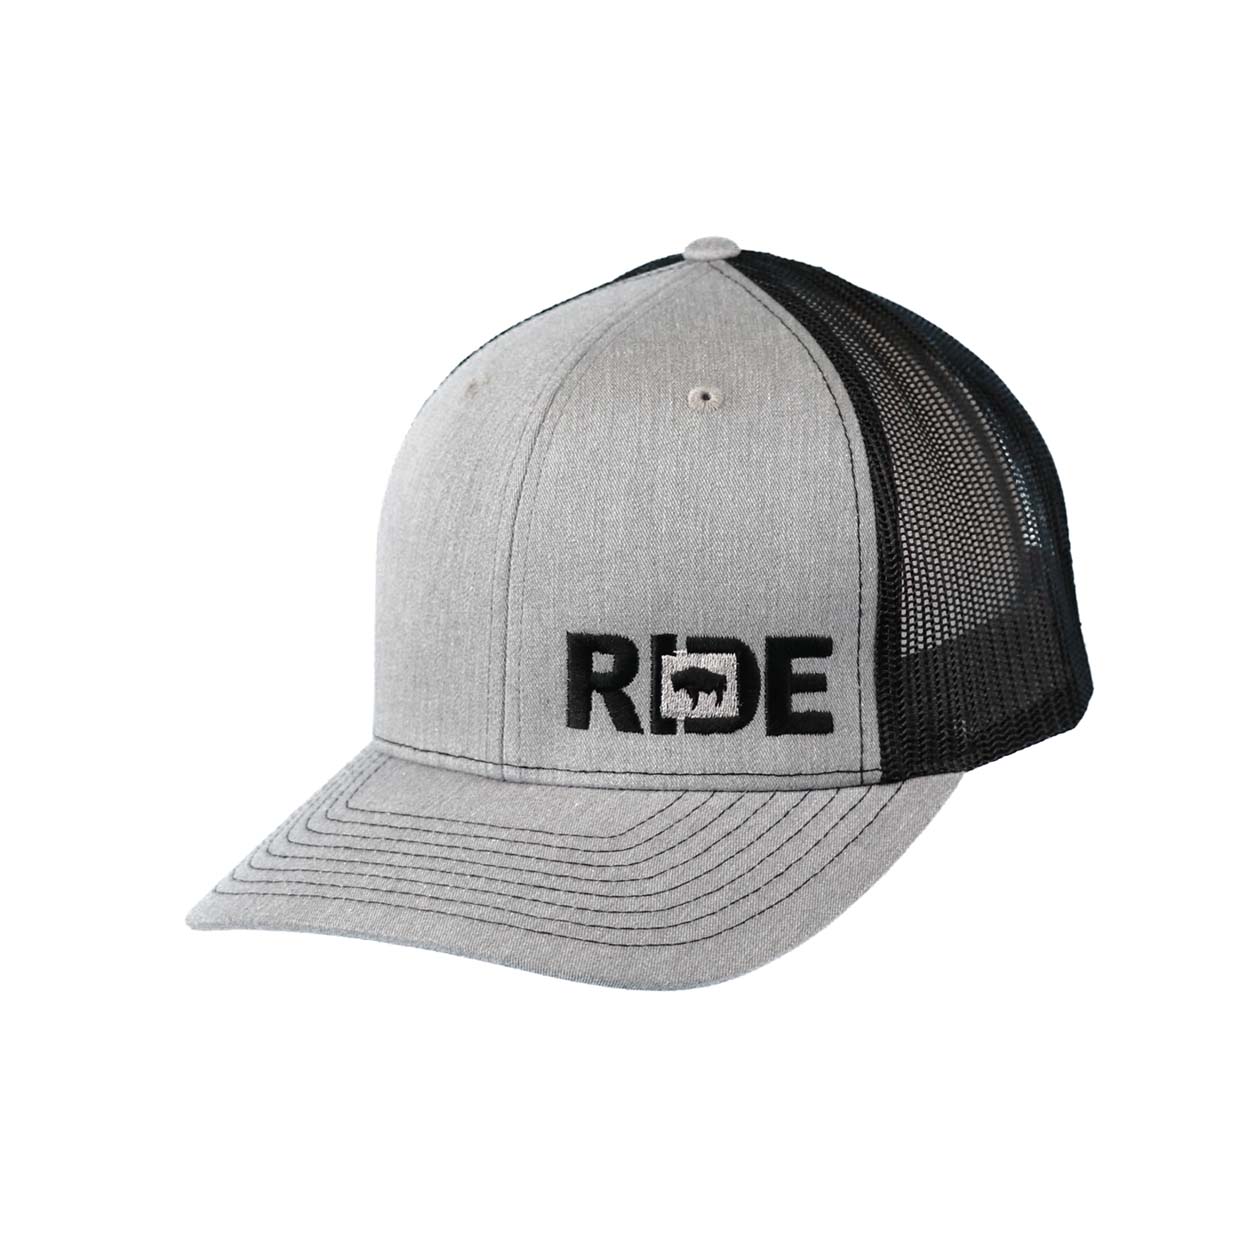 Ride Wyoming Night Out Pro Embroidered Snapback Trucker Hat Heather Gray/Black